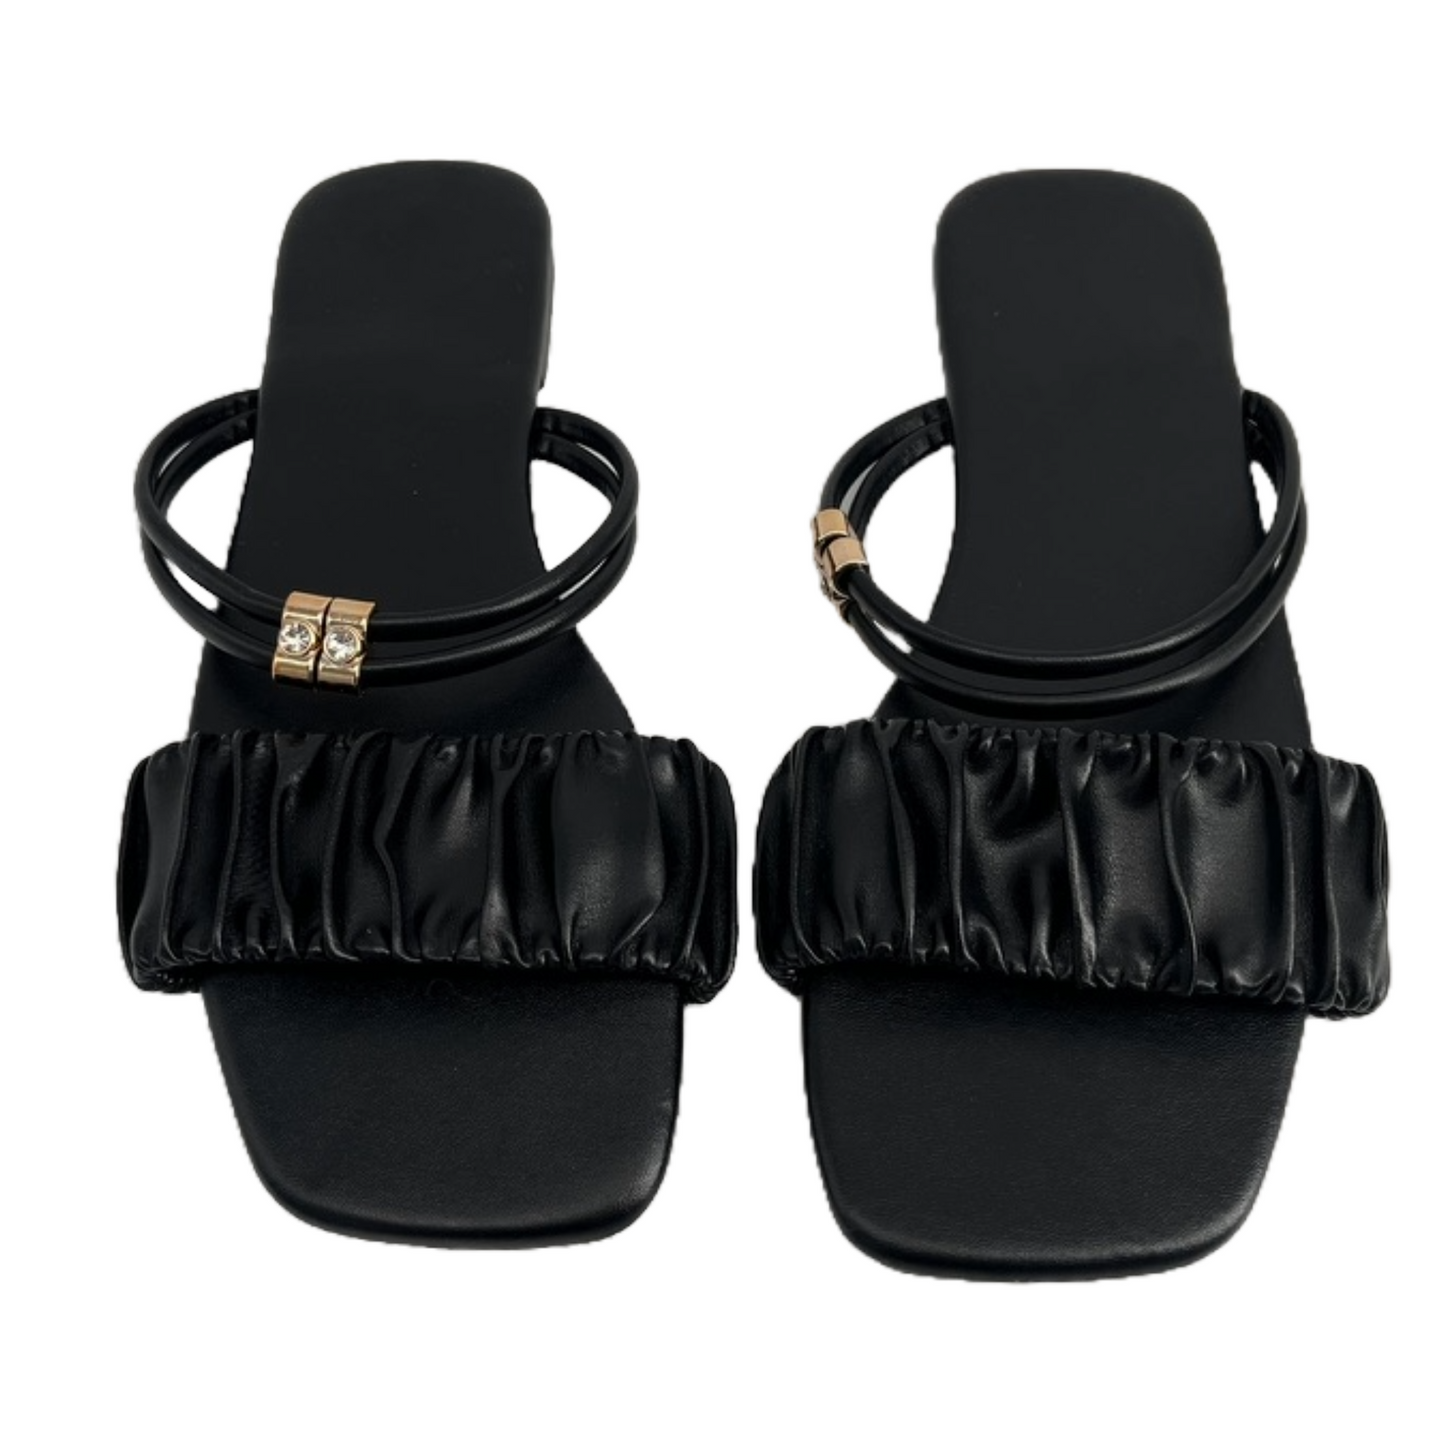 Black Sandals for women with gold ring (Size 37)